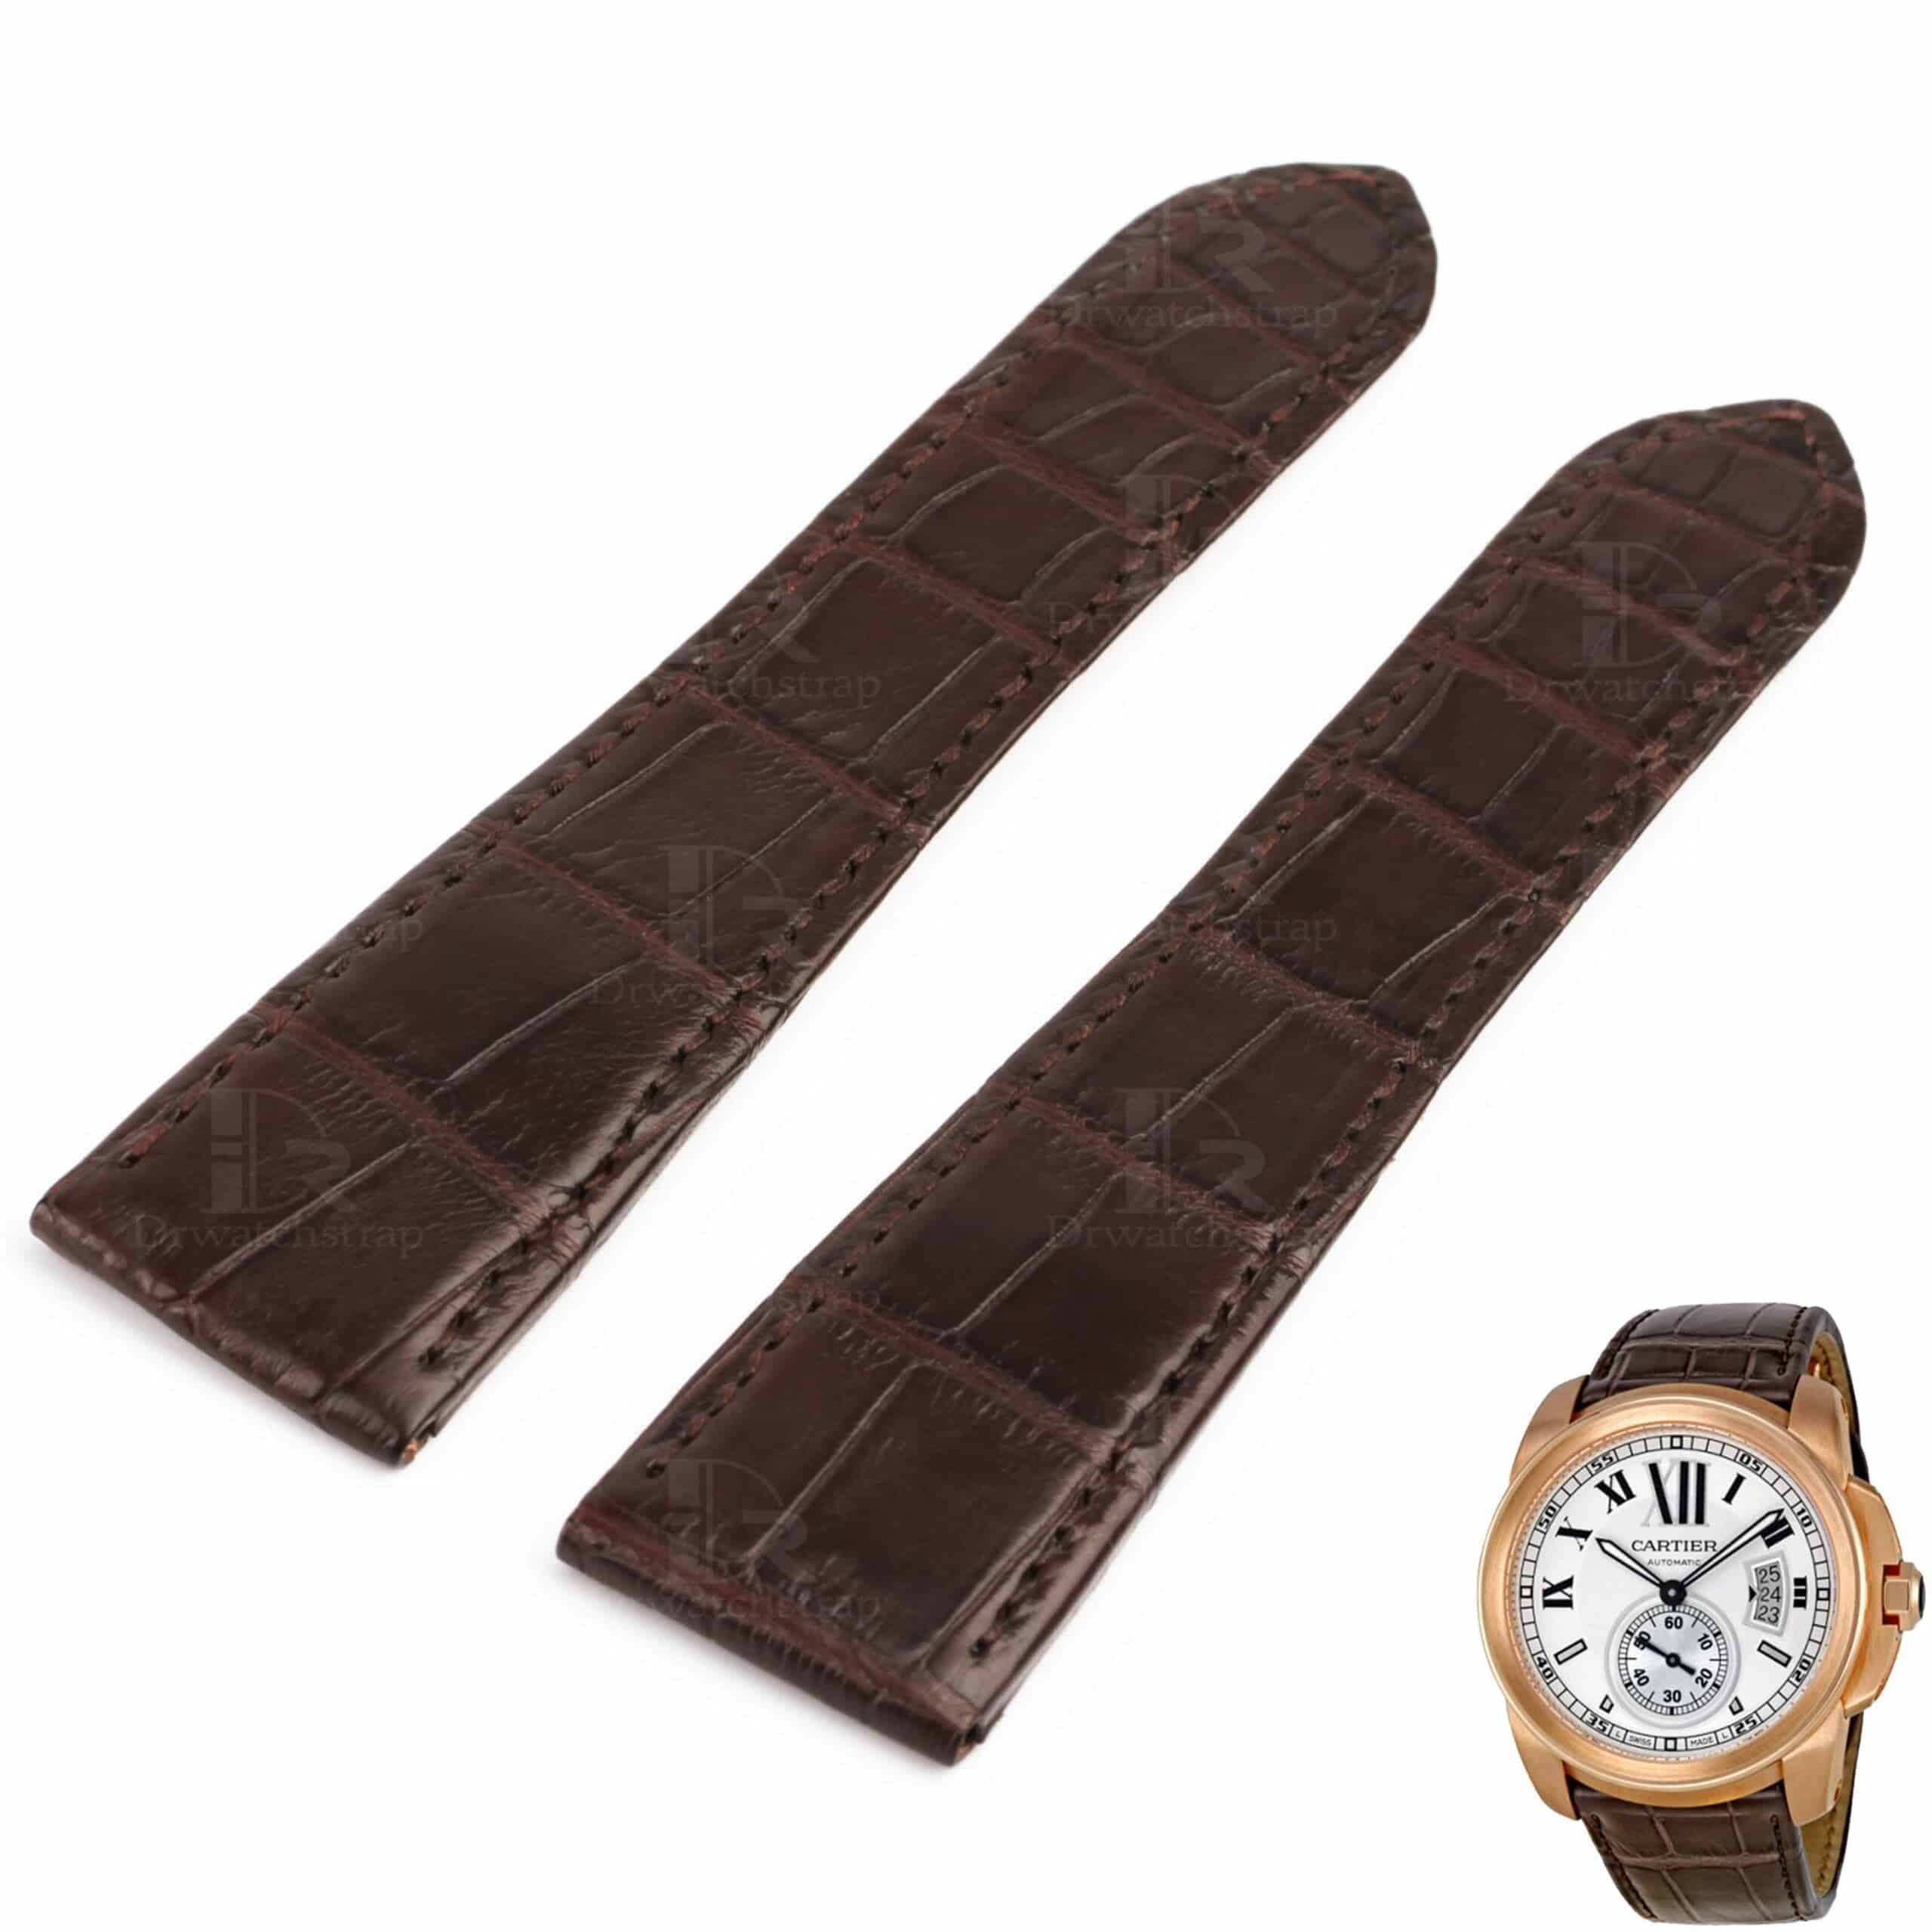 Cartier Calibre Watch band Leather 